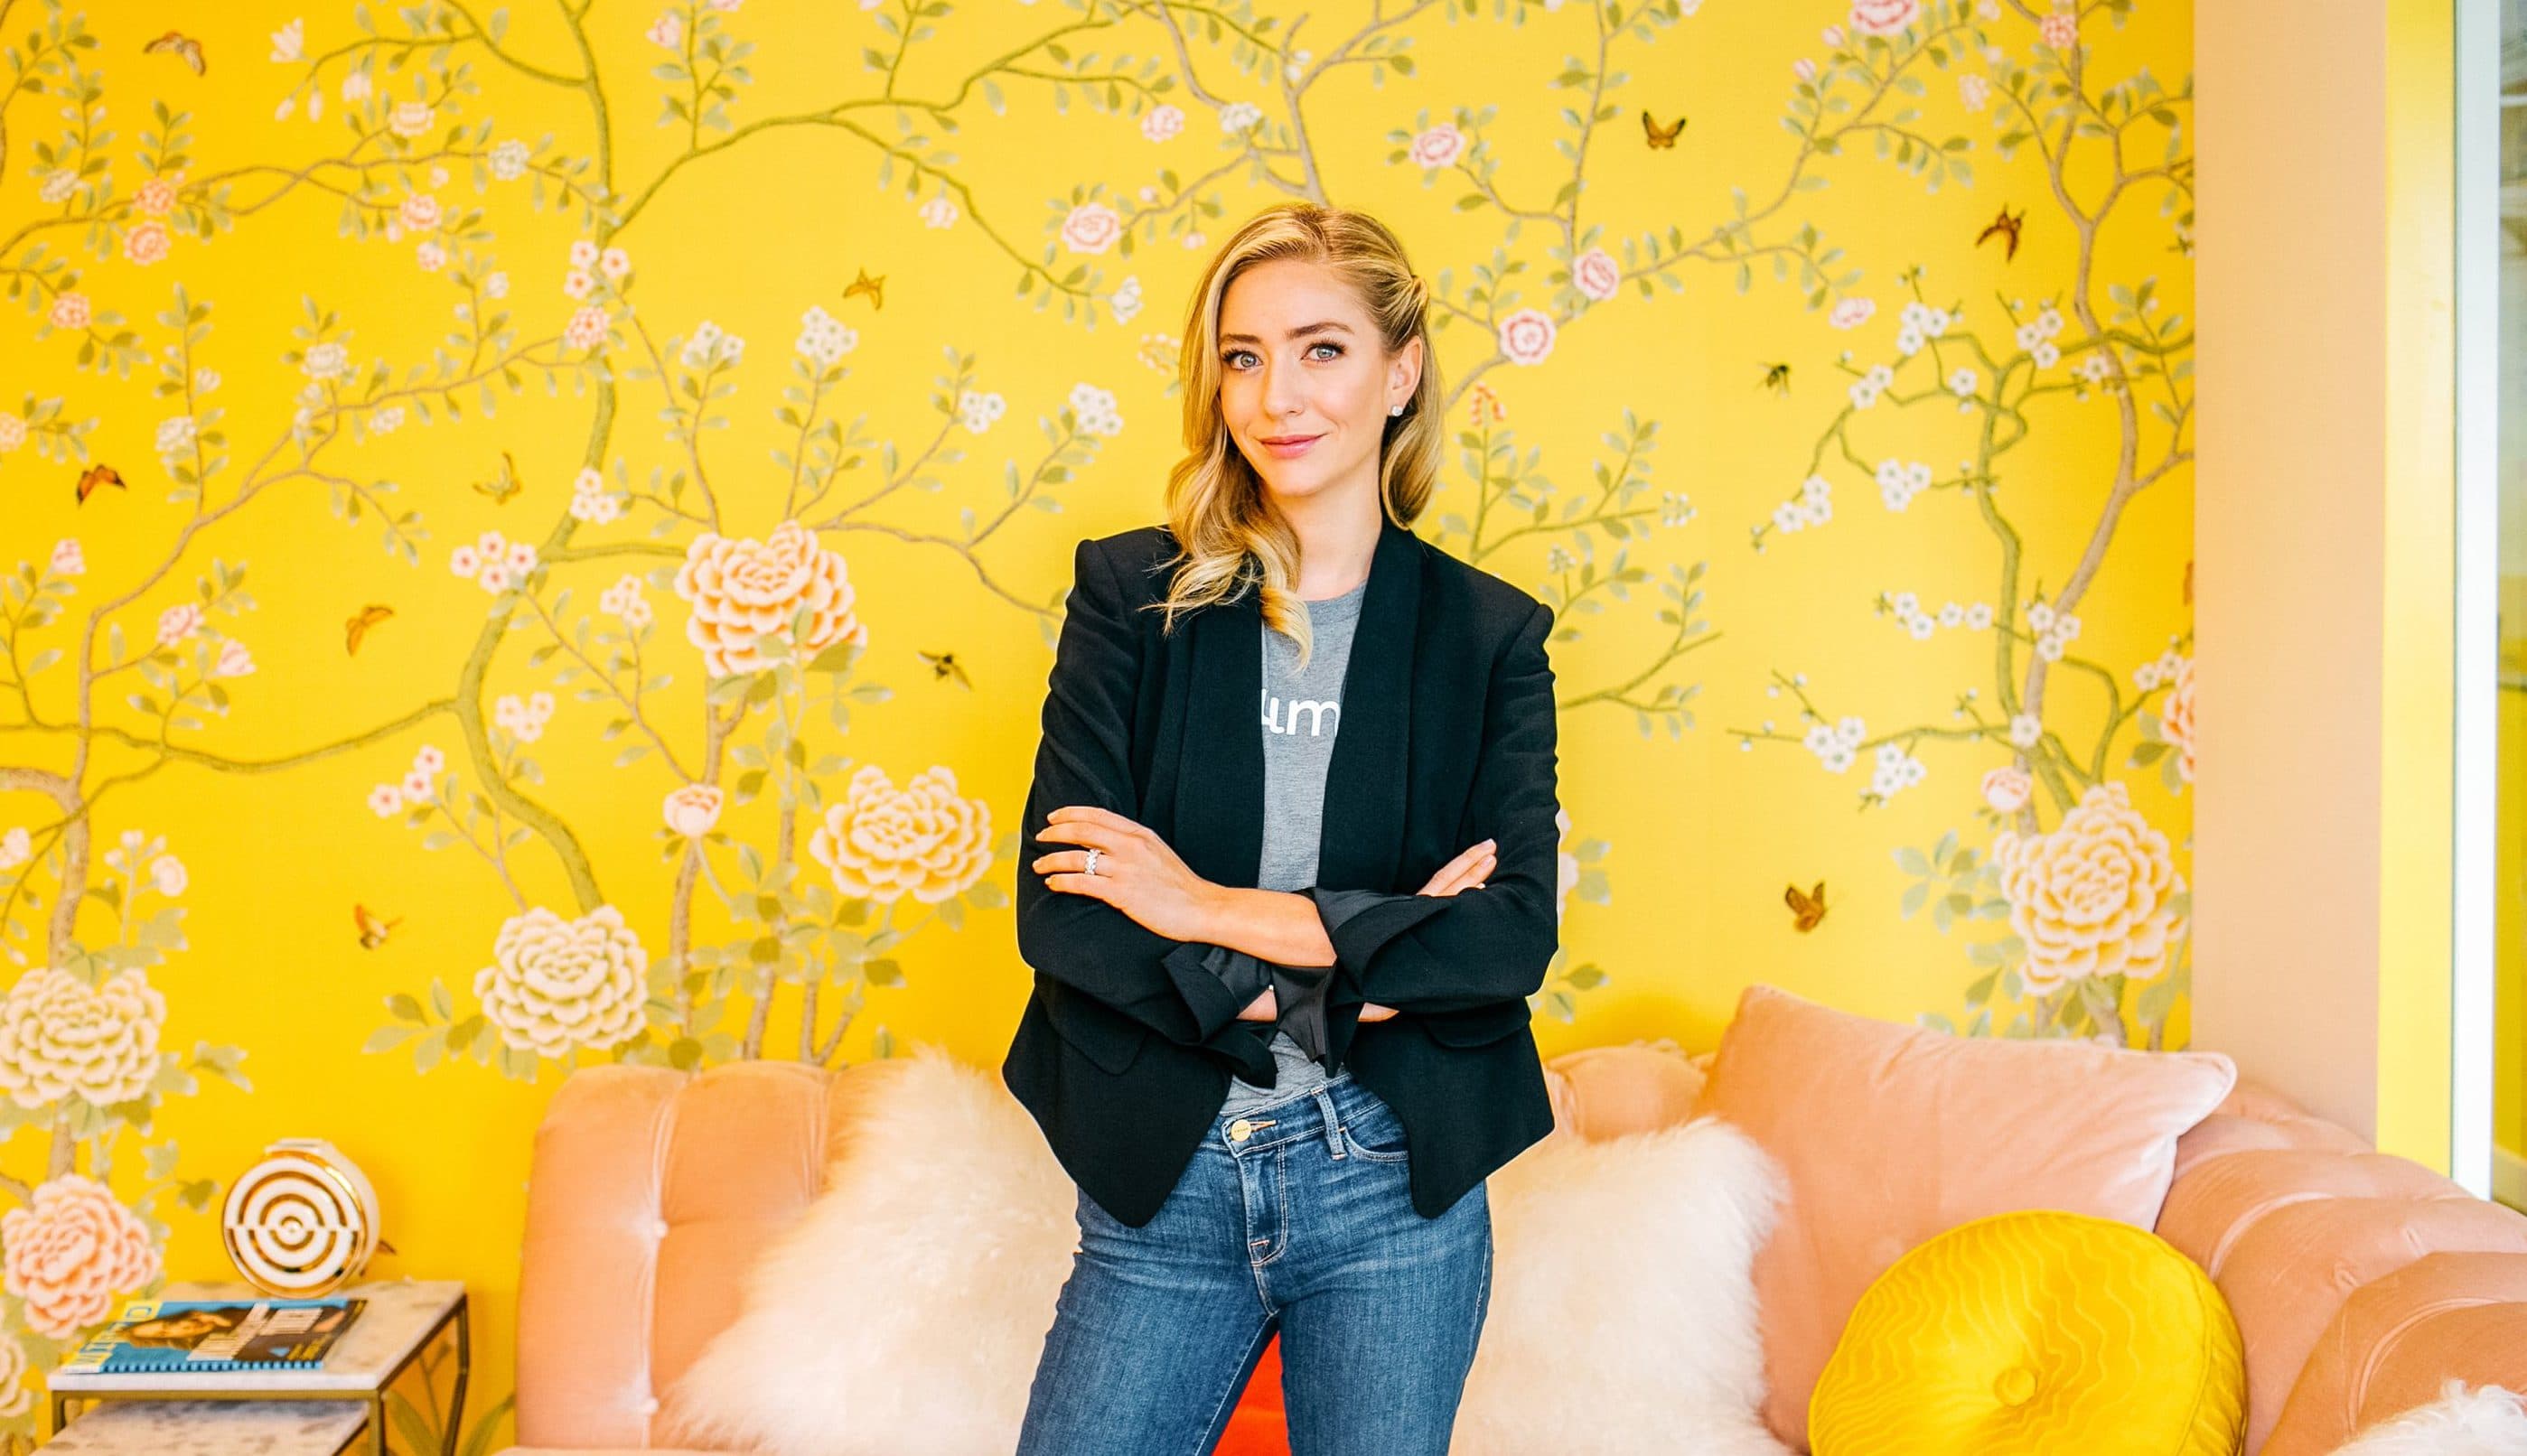 We reviewed the new Bumble app – A dating platform made for women, by a woman